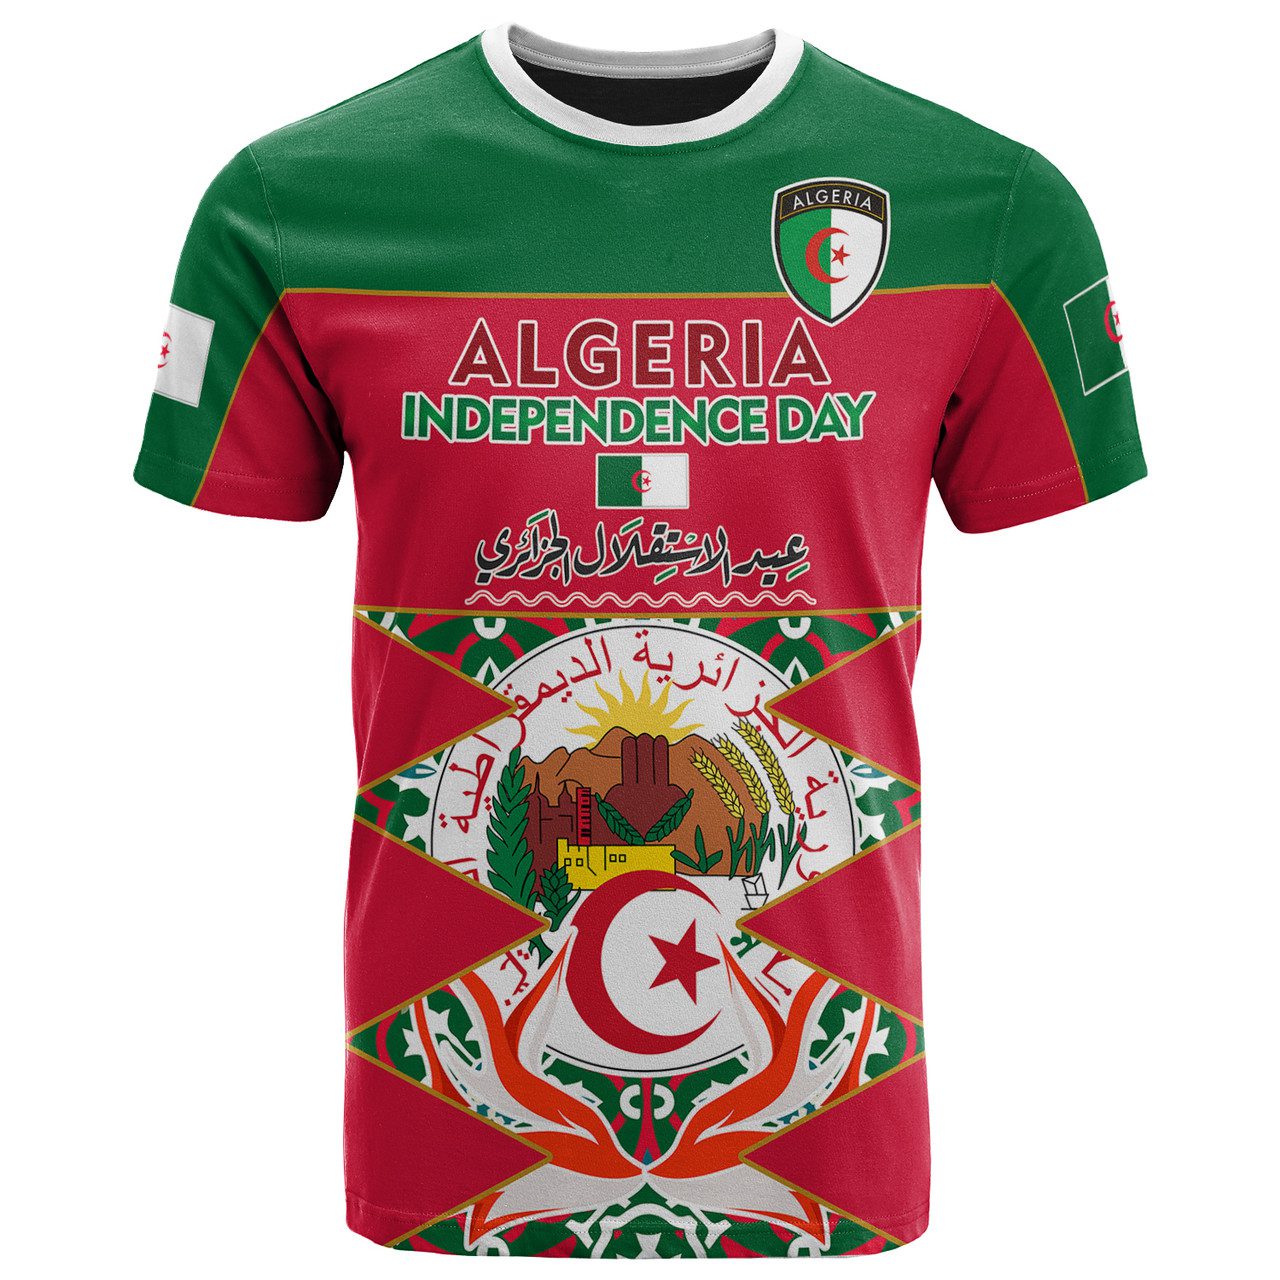 Algeria T-Shirt – Custom Algeria Independence Day With Fennec Fox And National Emblem T-Shirt